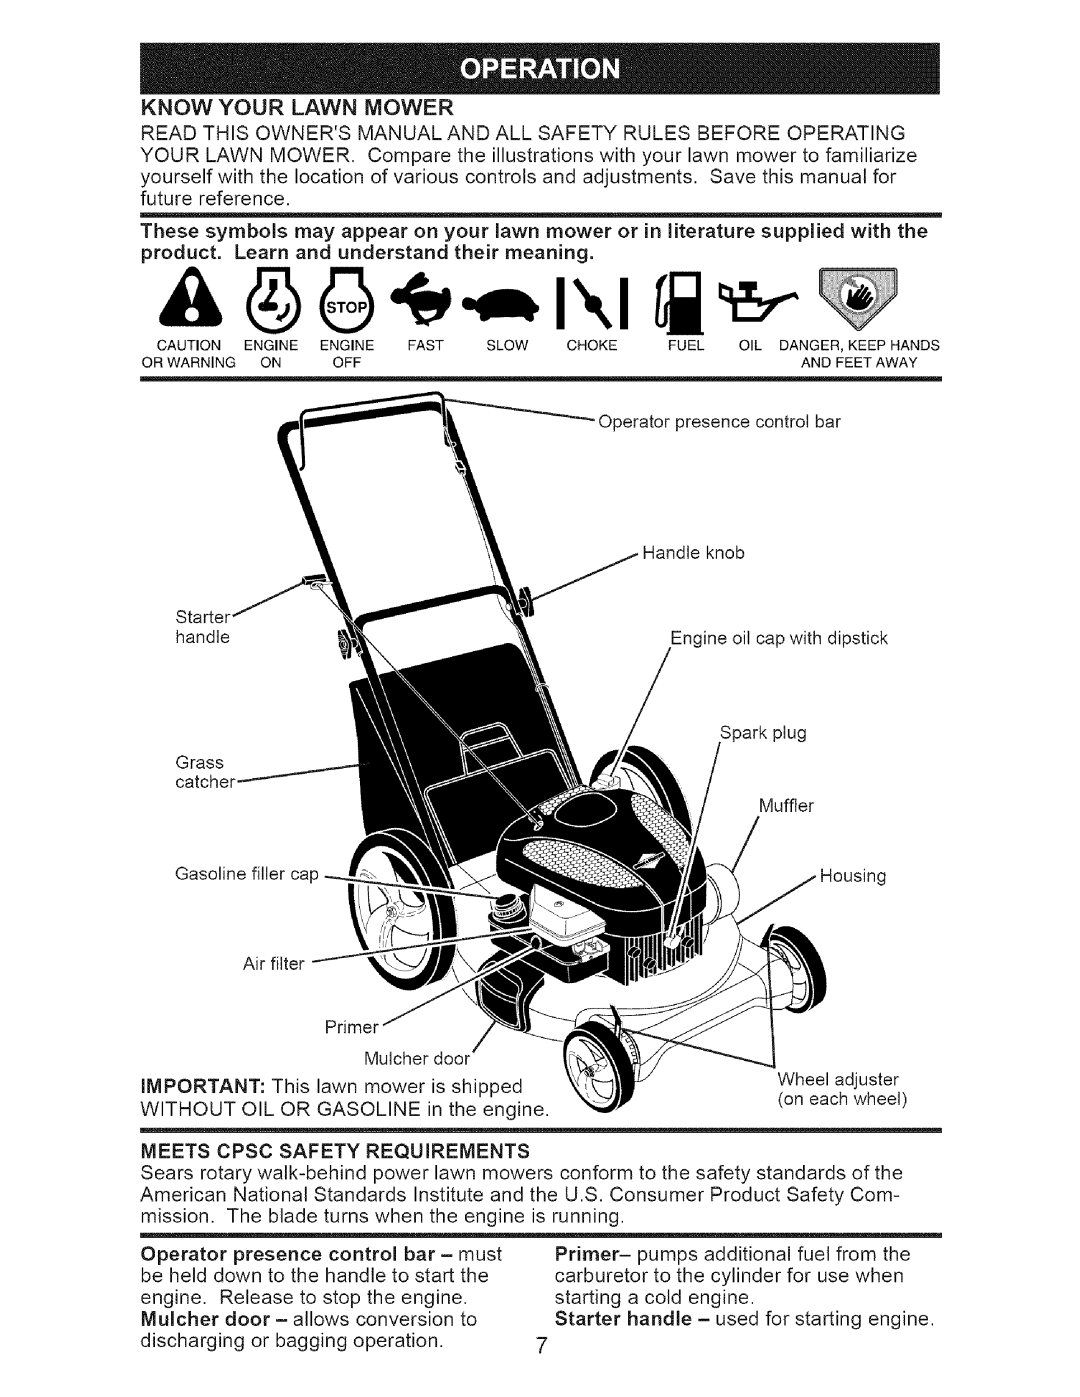 Craftsman 917.3882 owner manual Know Your Lawn Mower, Starter handle = used for starting engine 